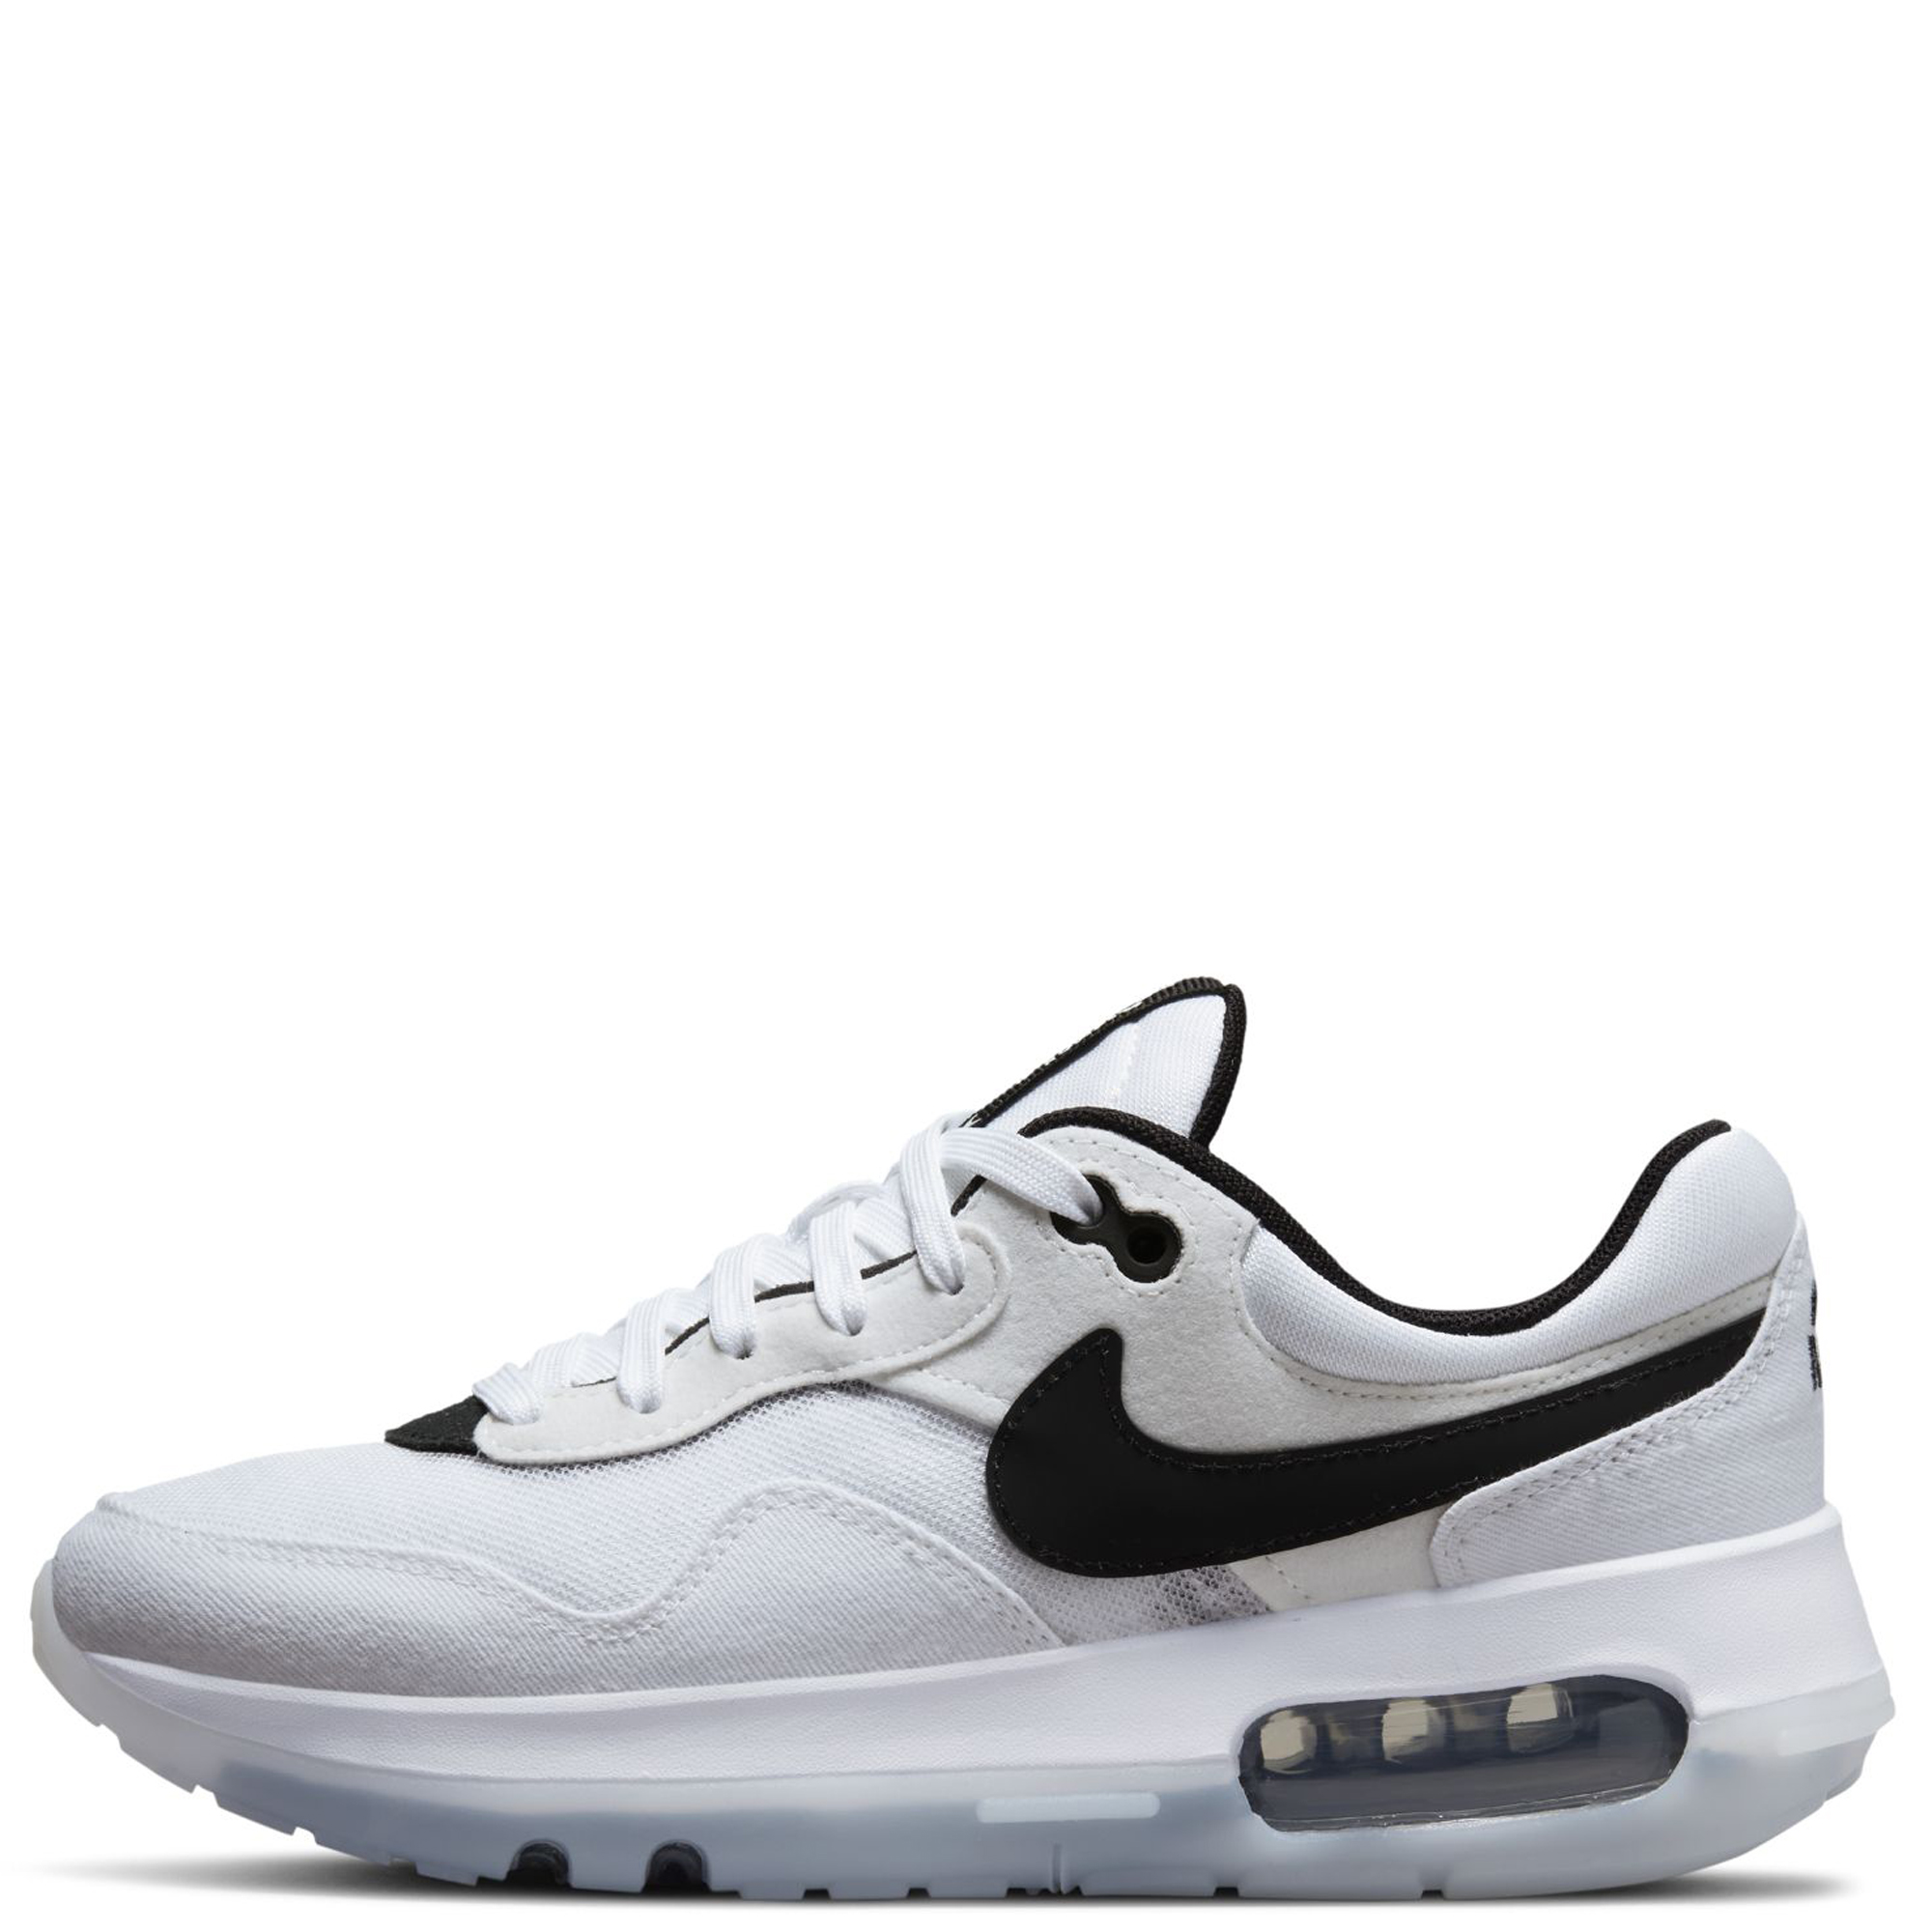 Barter comment missile NIKE (GS) Air Max Motif DH9388 100 - Shiekh